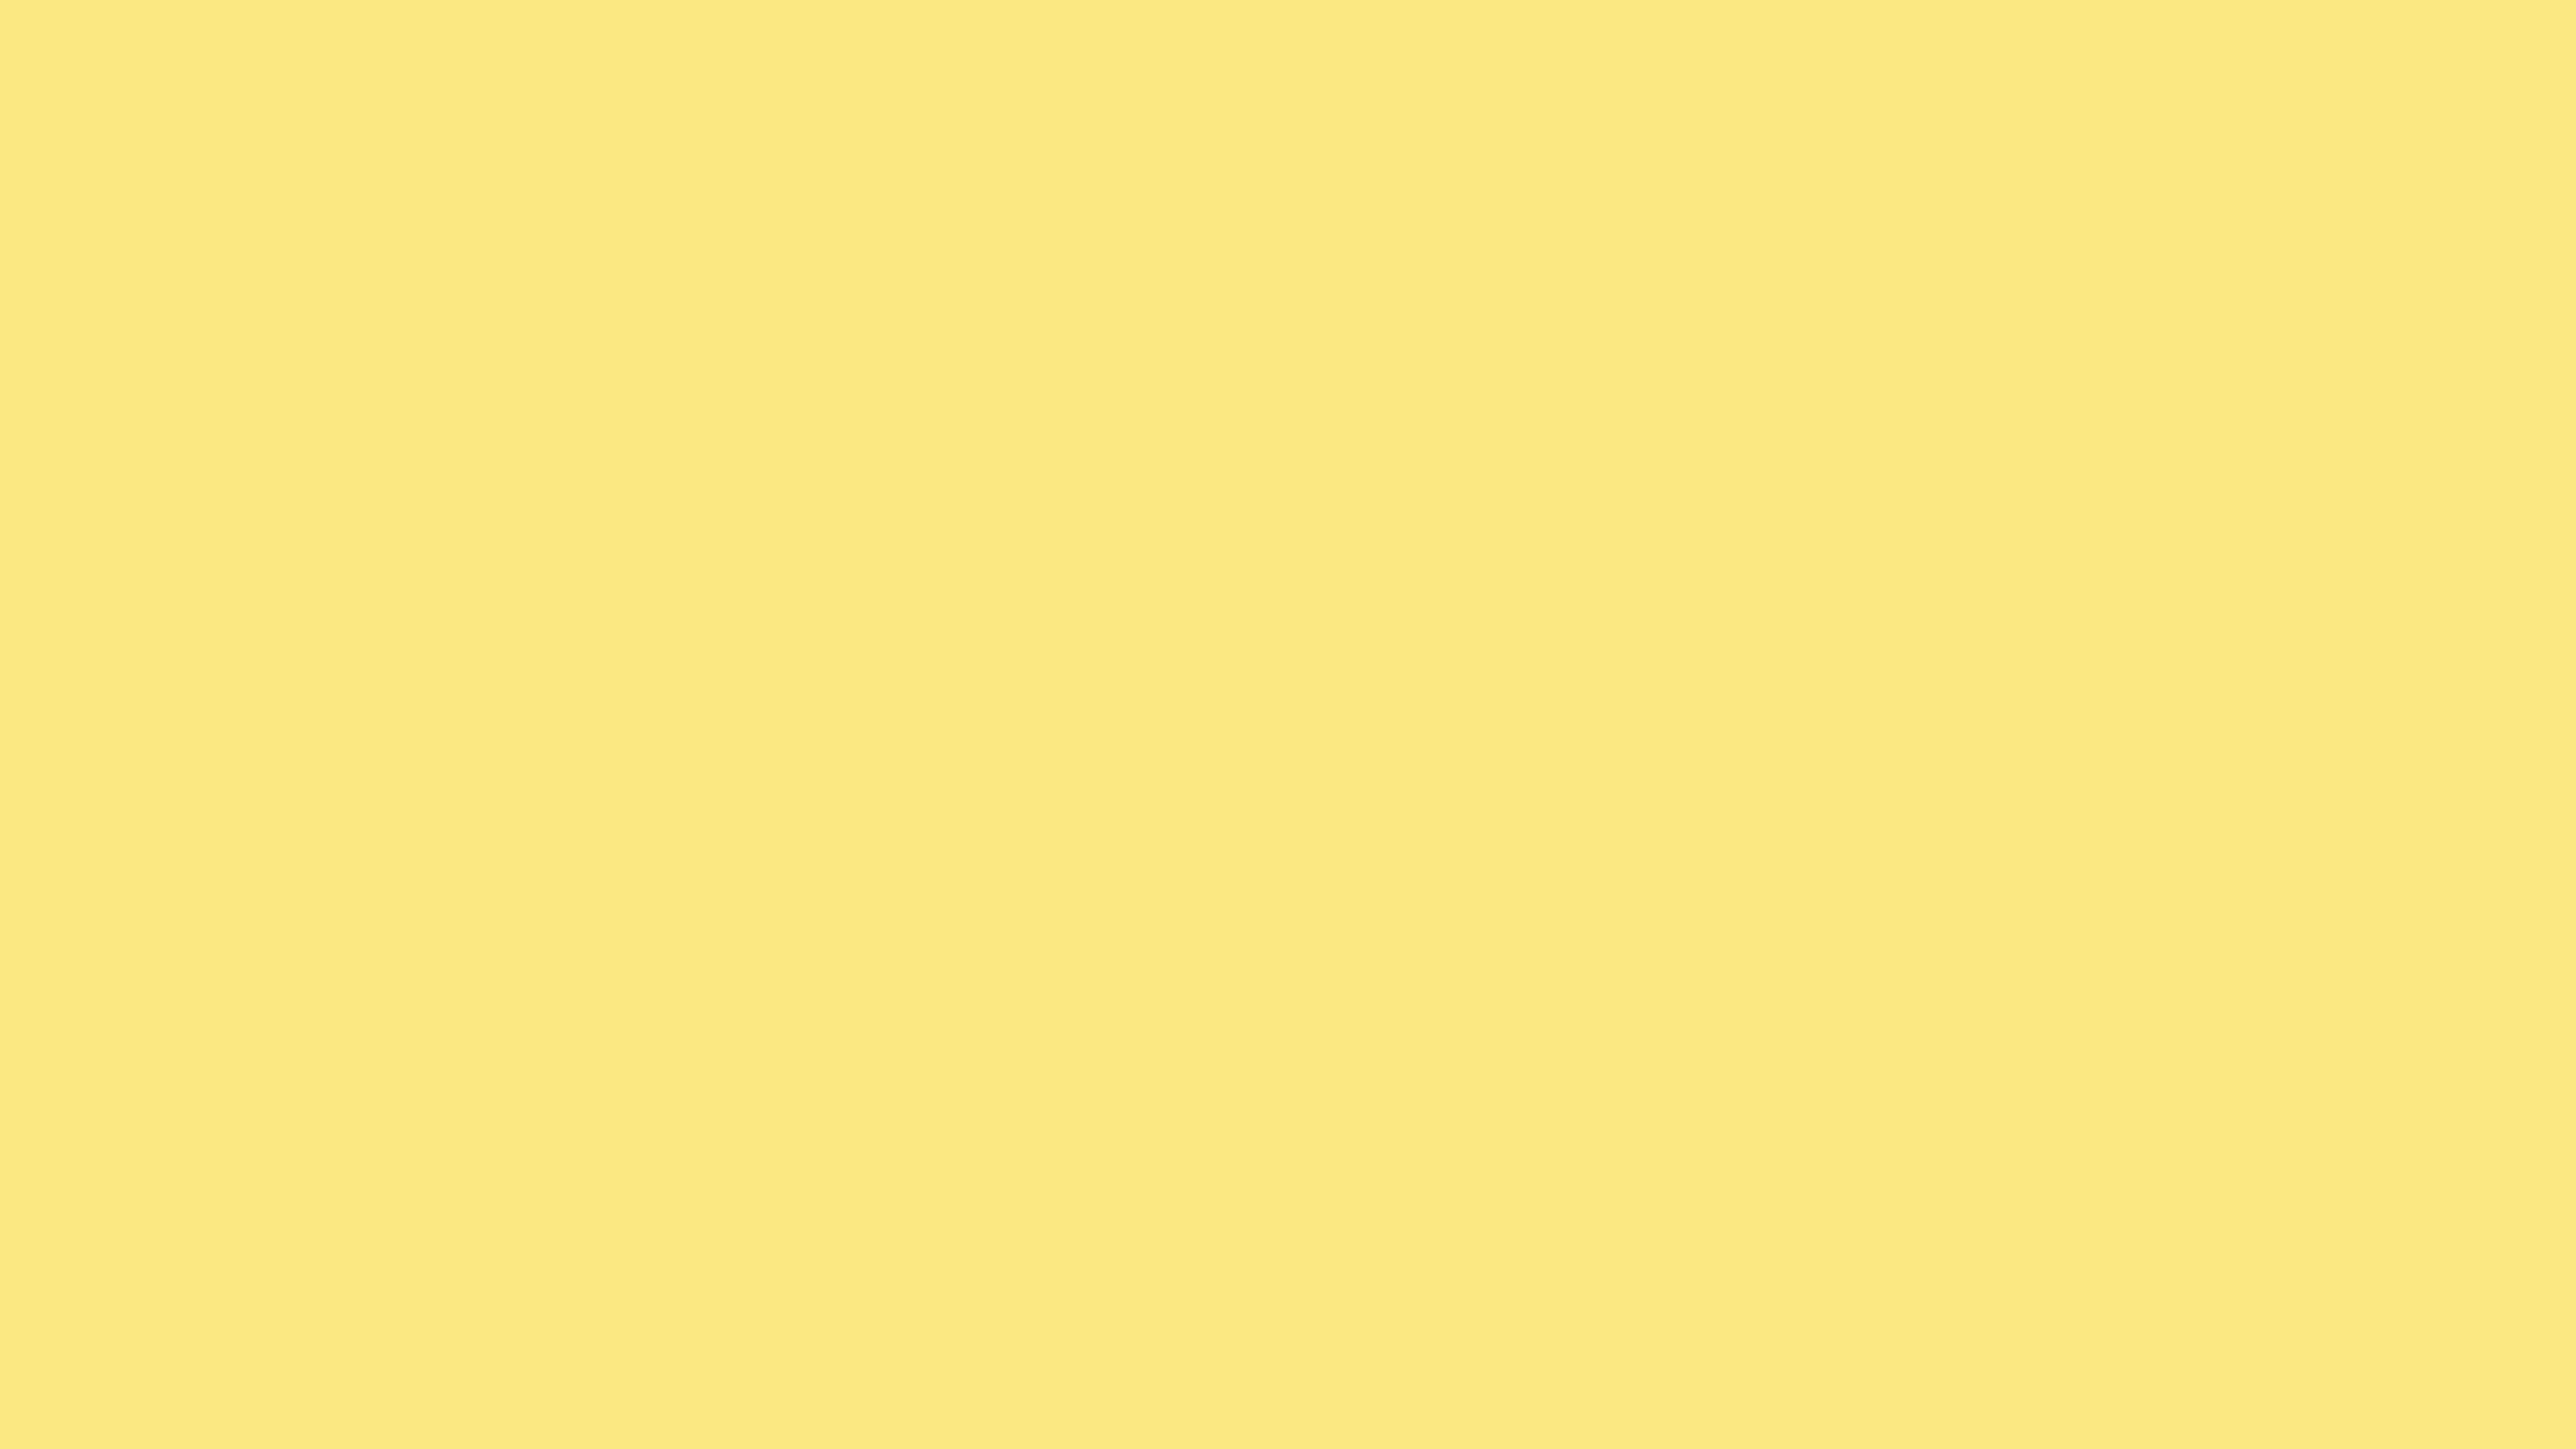 7680x4320 Yellow Crayola Solid Color Background